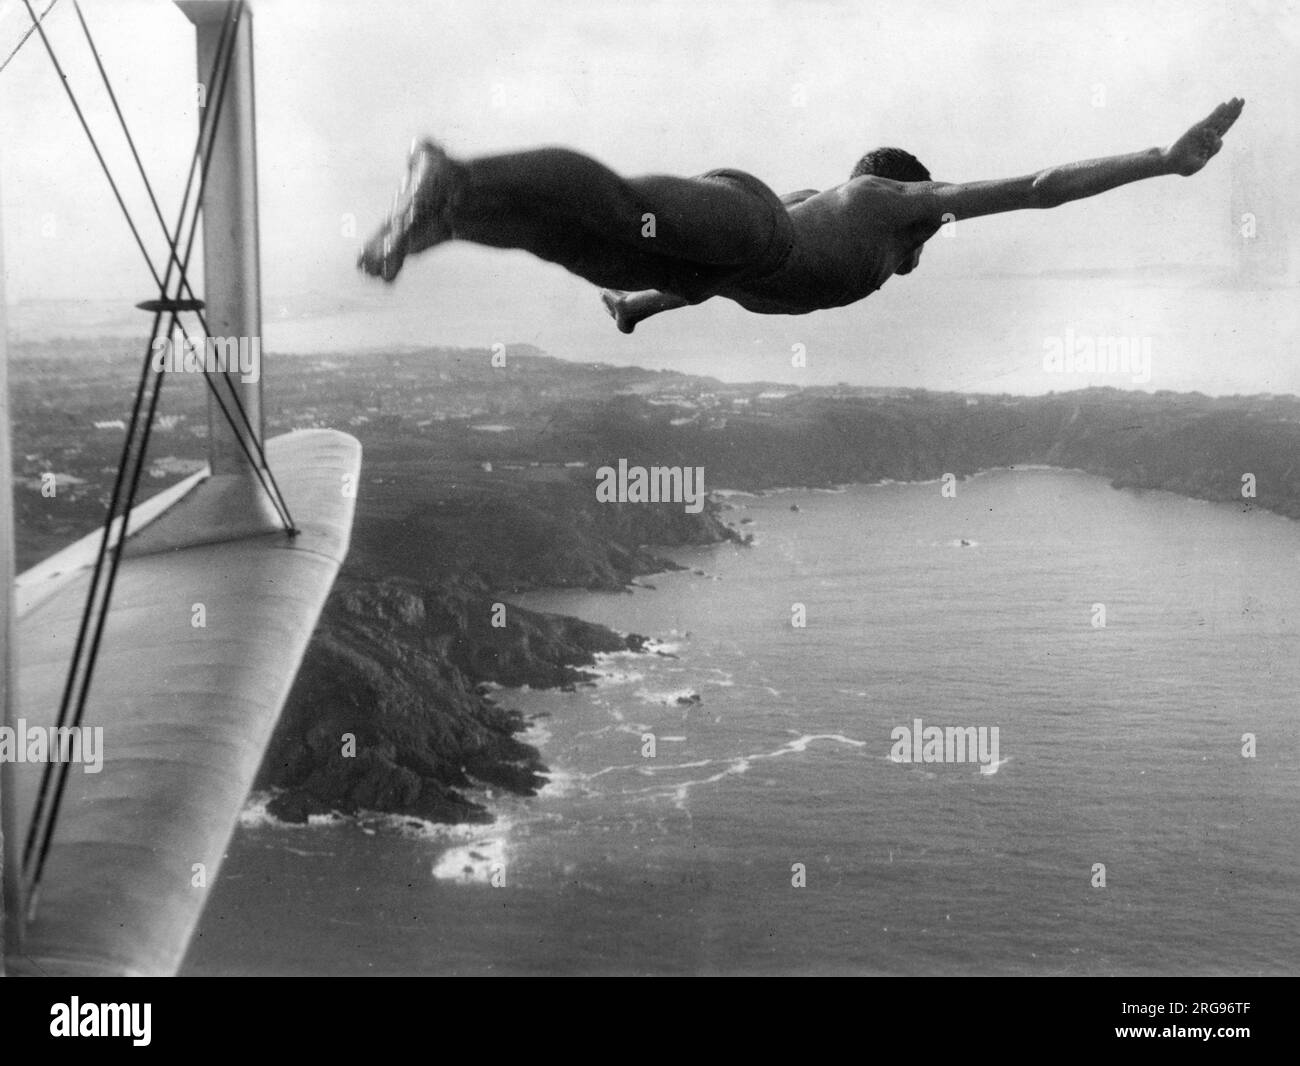 Man appearing to dive into the sea from an aeroplane. Stock Photo